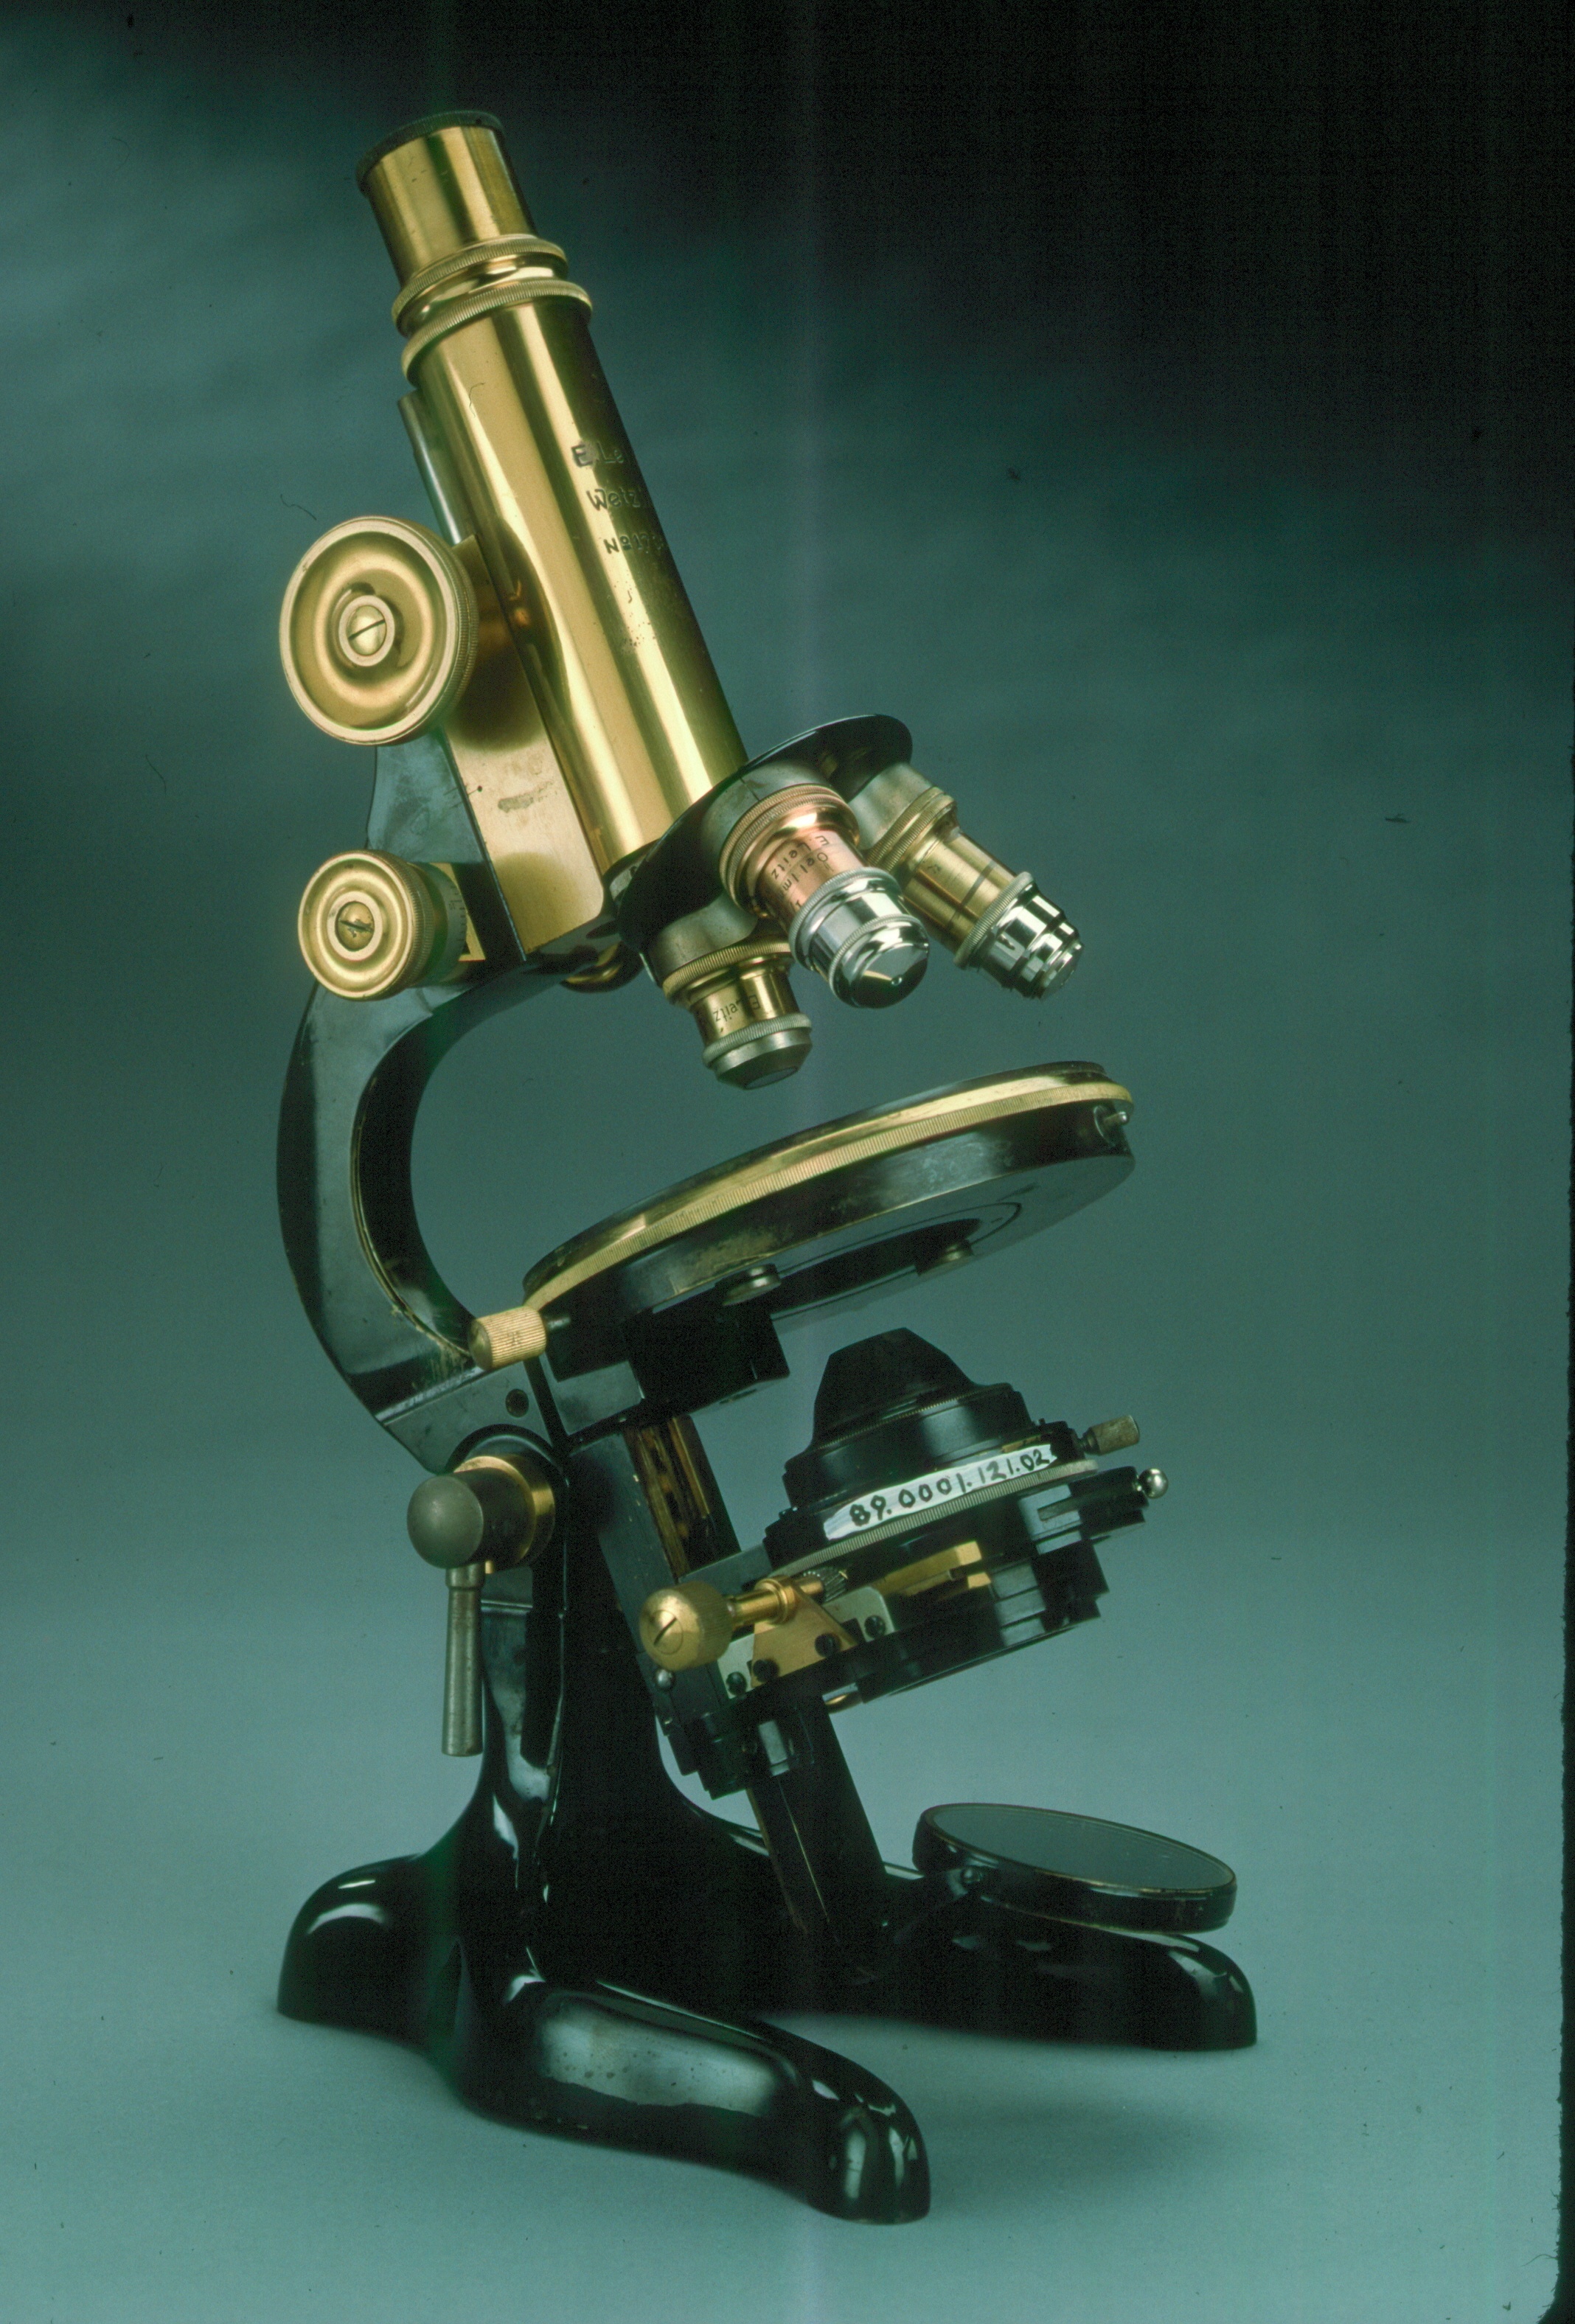 A photo of an antique microscope